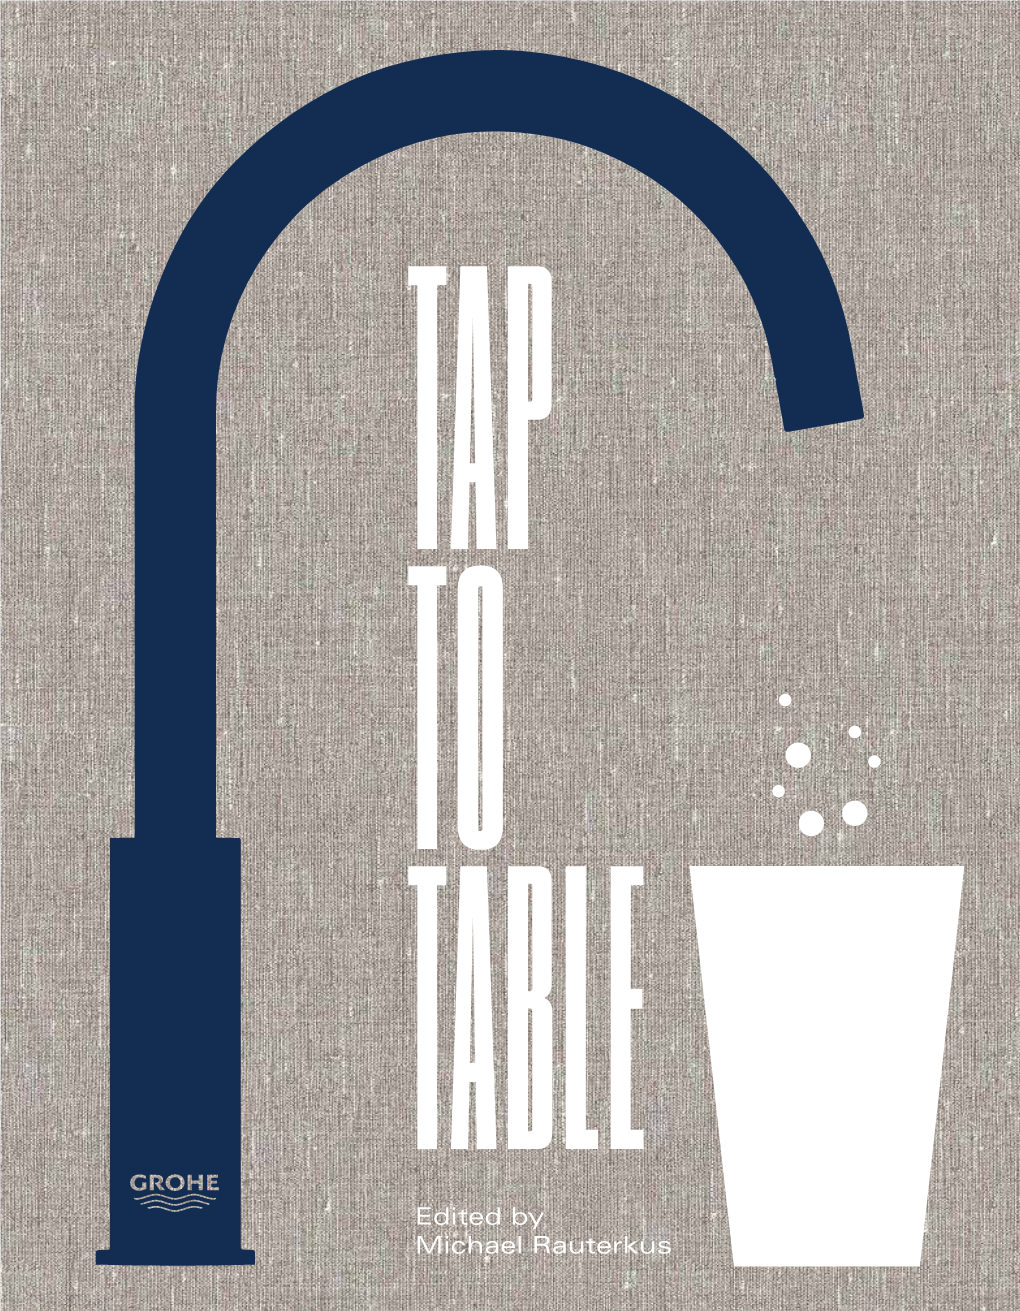 Tableedited by Michael Rauterkus STARTERS the Importance of Water for the Culinary Experience